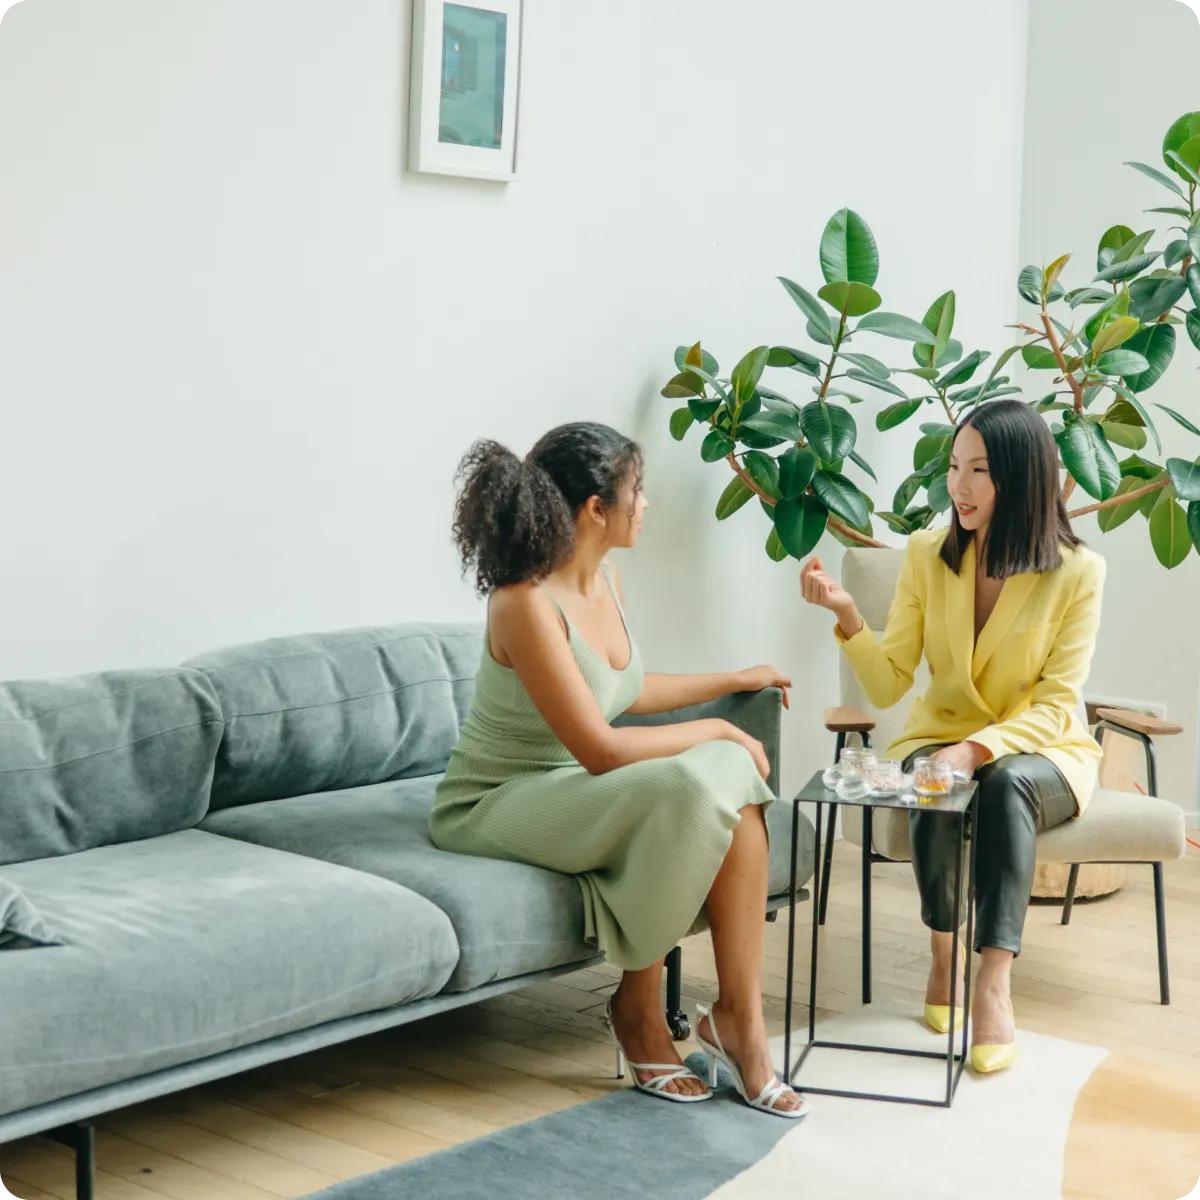 A picture of two women having a meeting with one sitting on a sofa and another one on a chair.